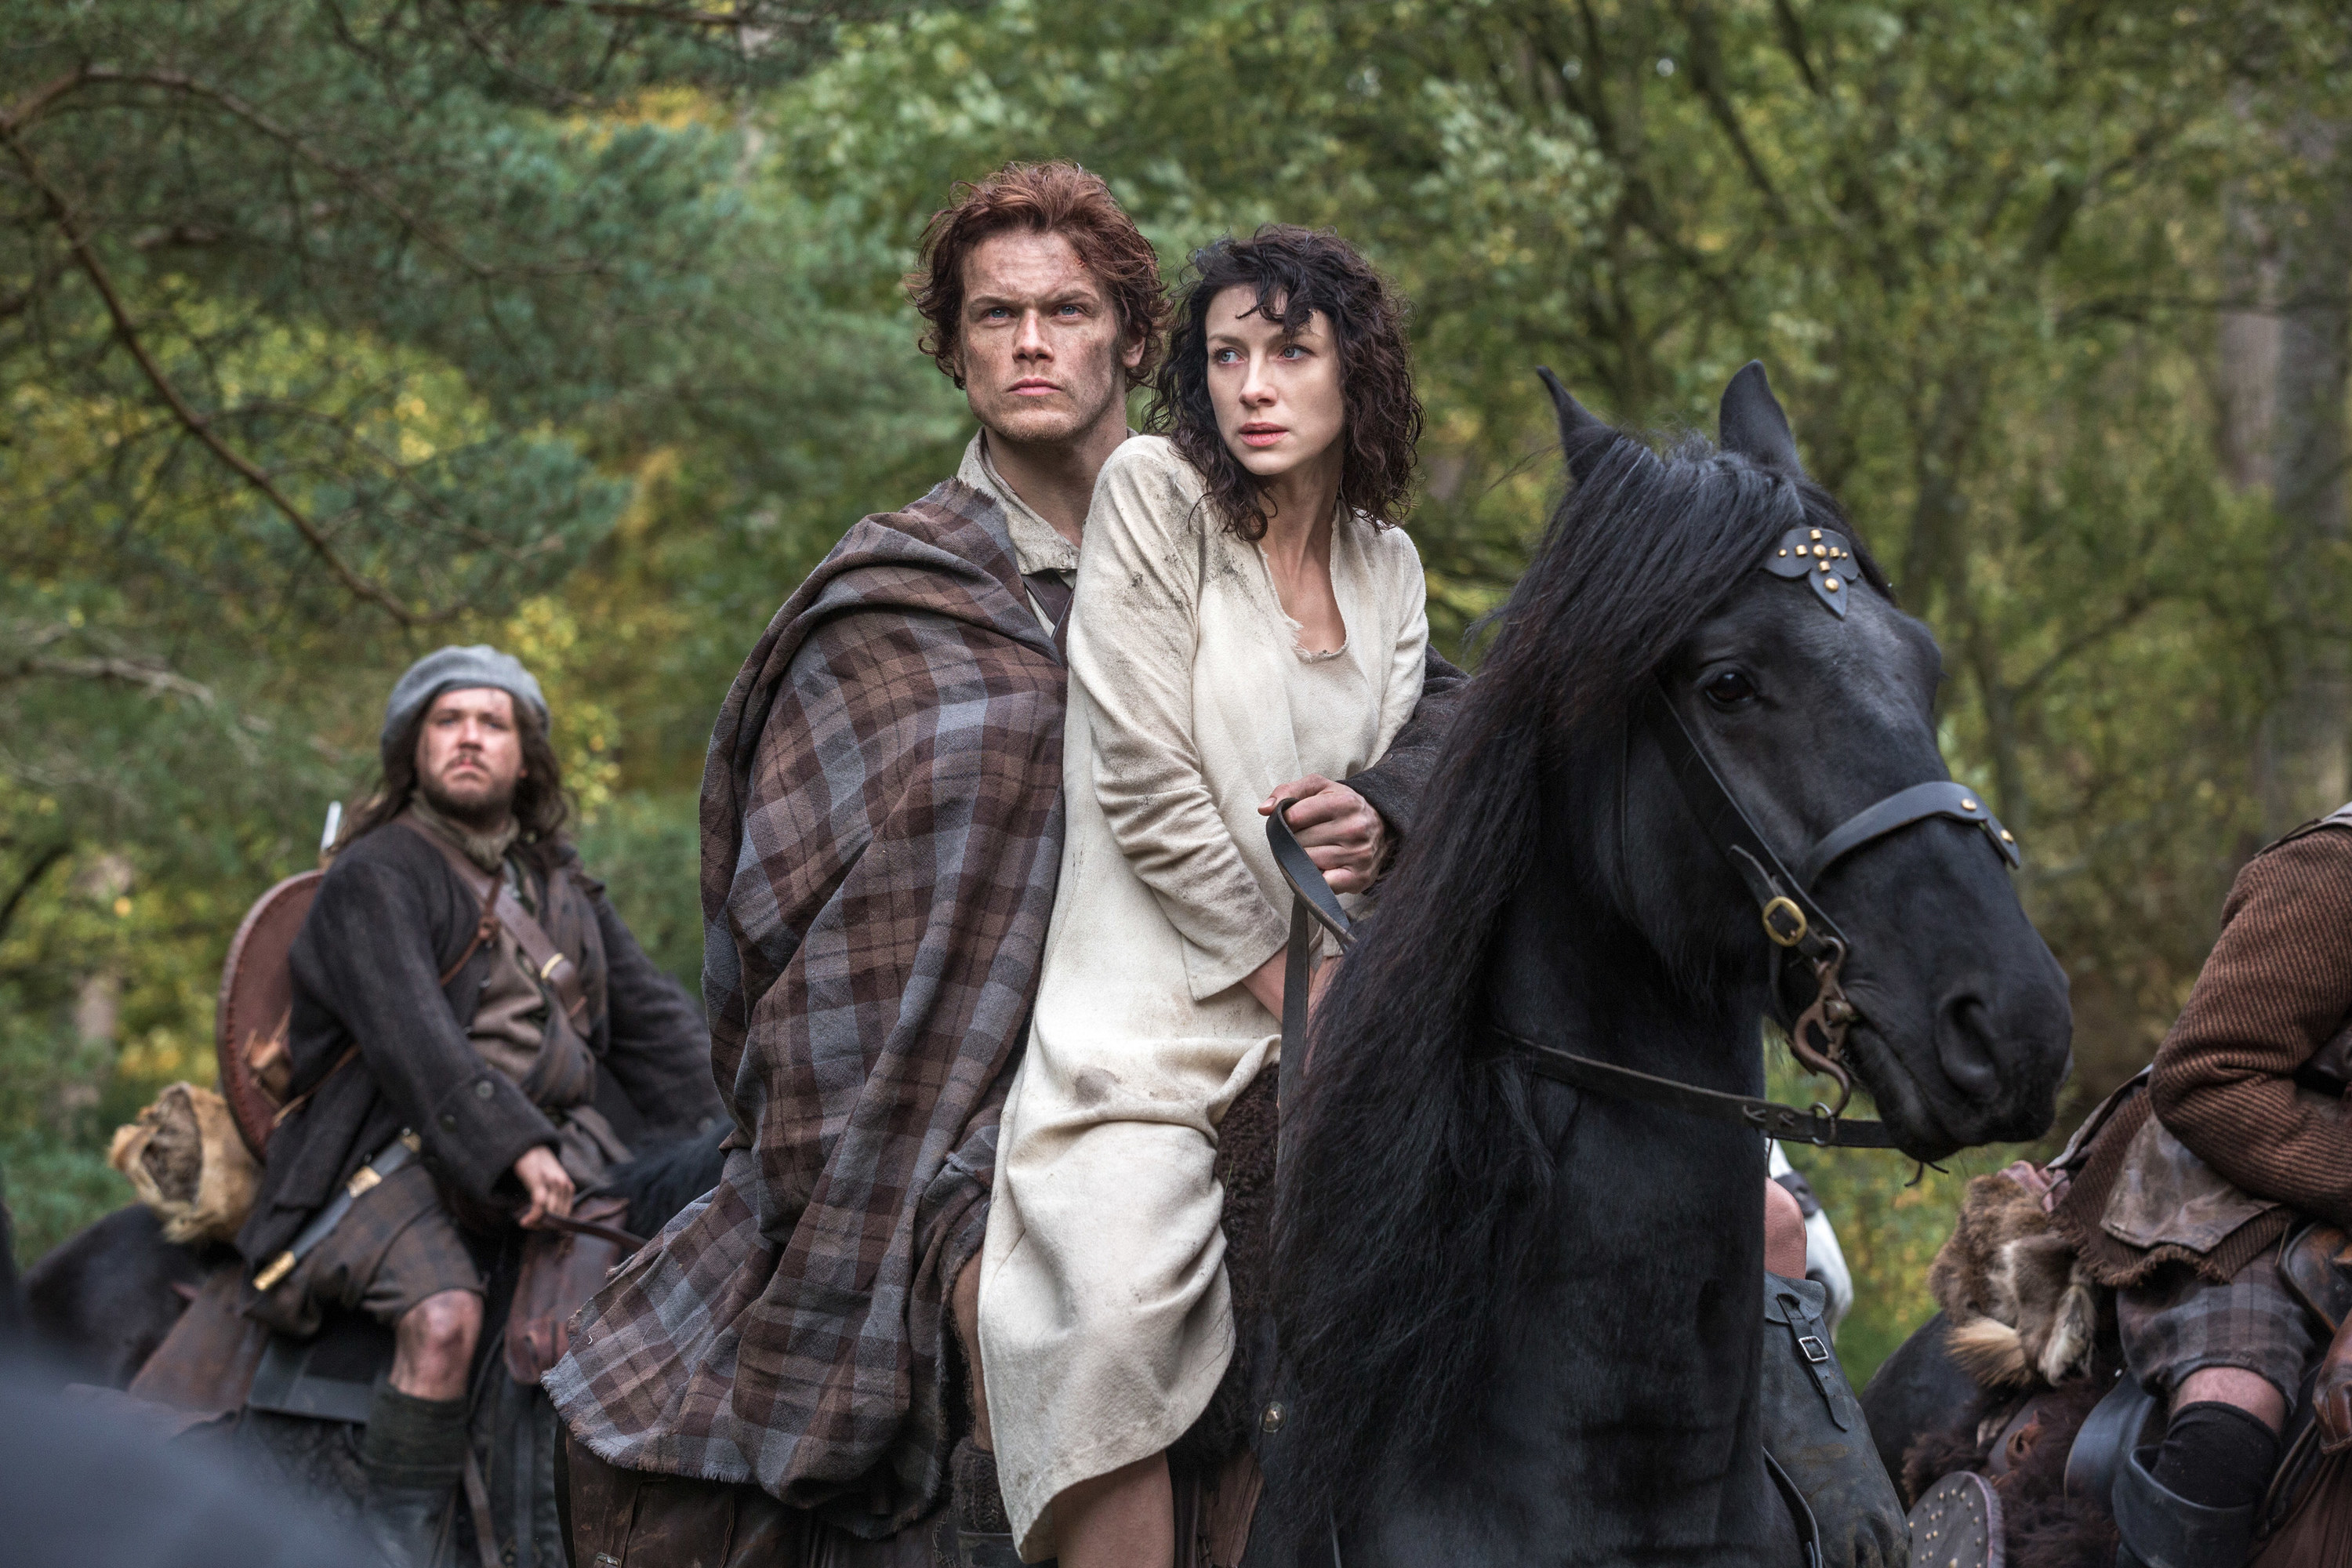 Jamie rides on a horse with Claire